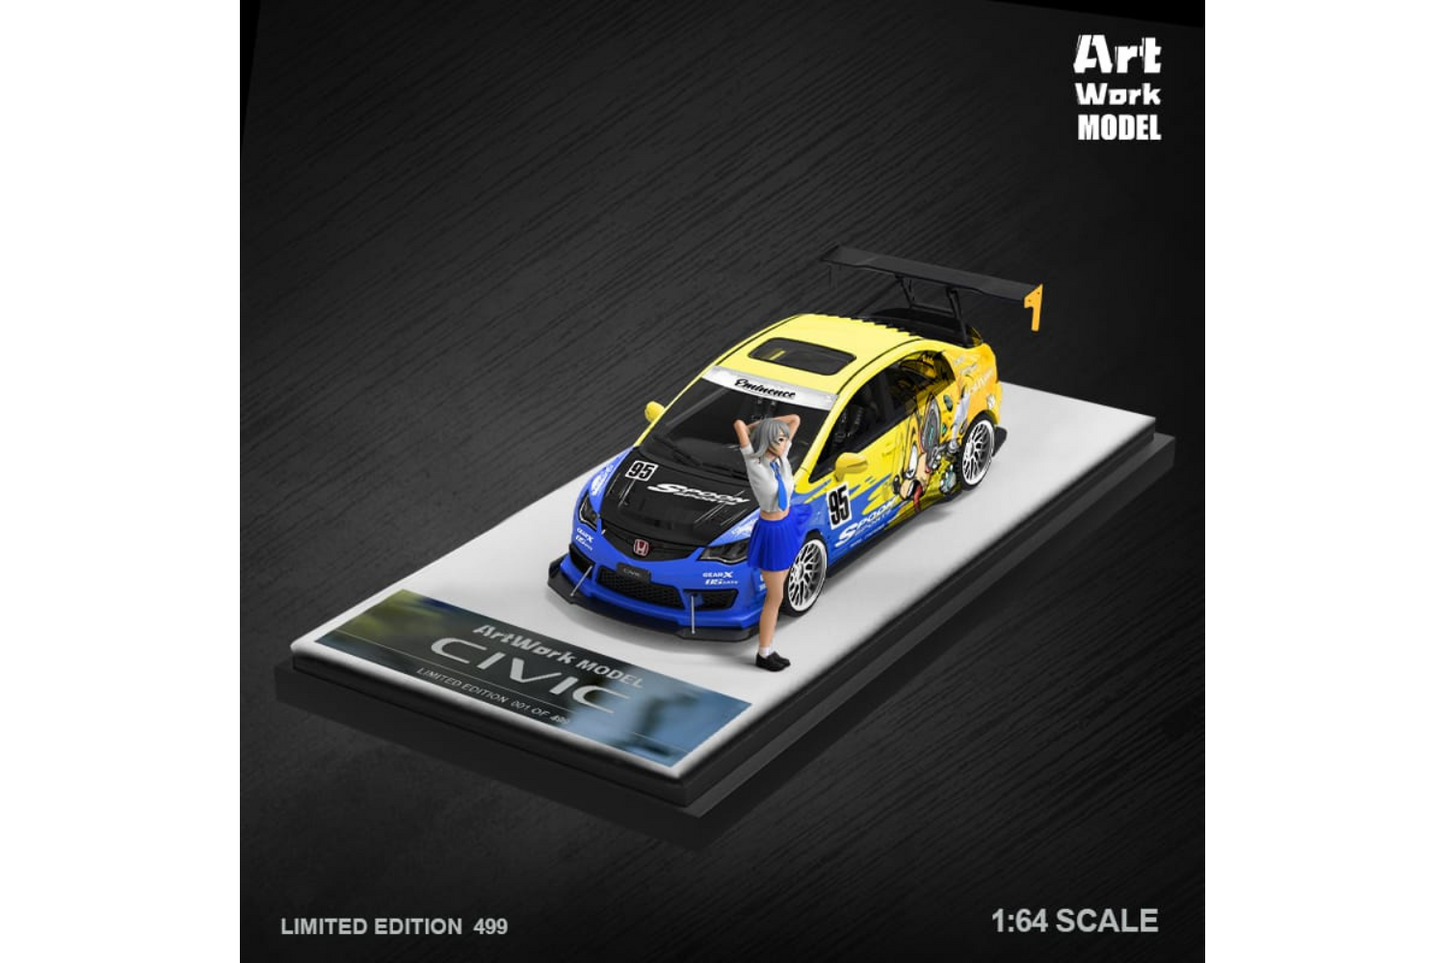 Time Micro 1/64 Honda Civic (FD2) Track Edition in Spoon Livery